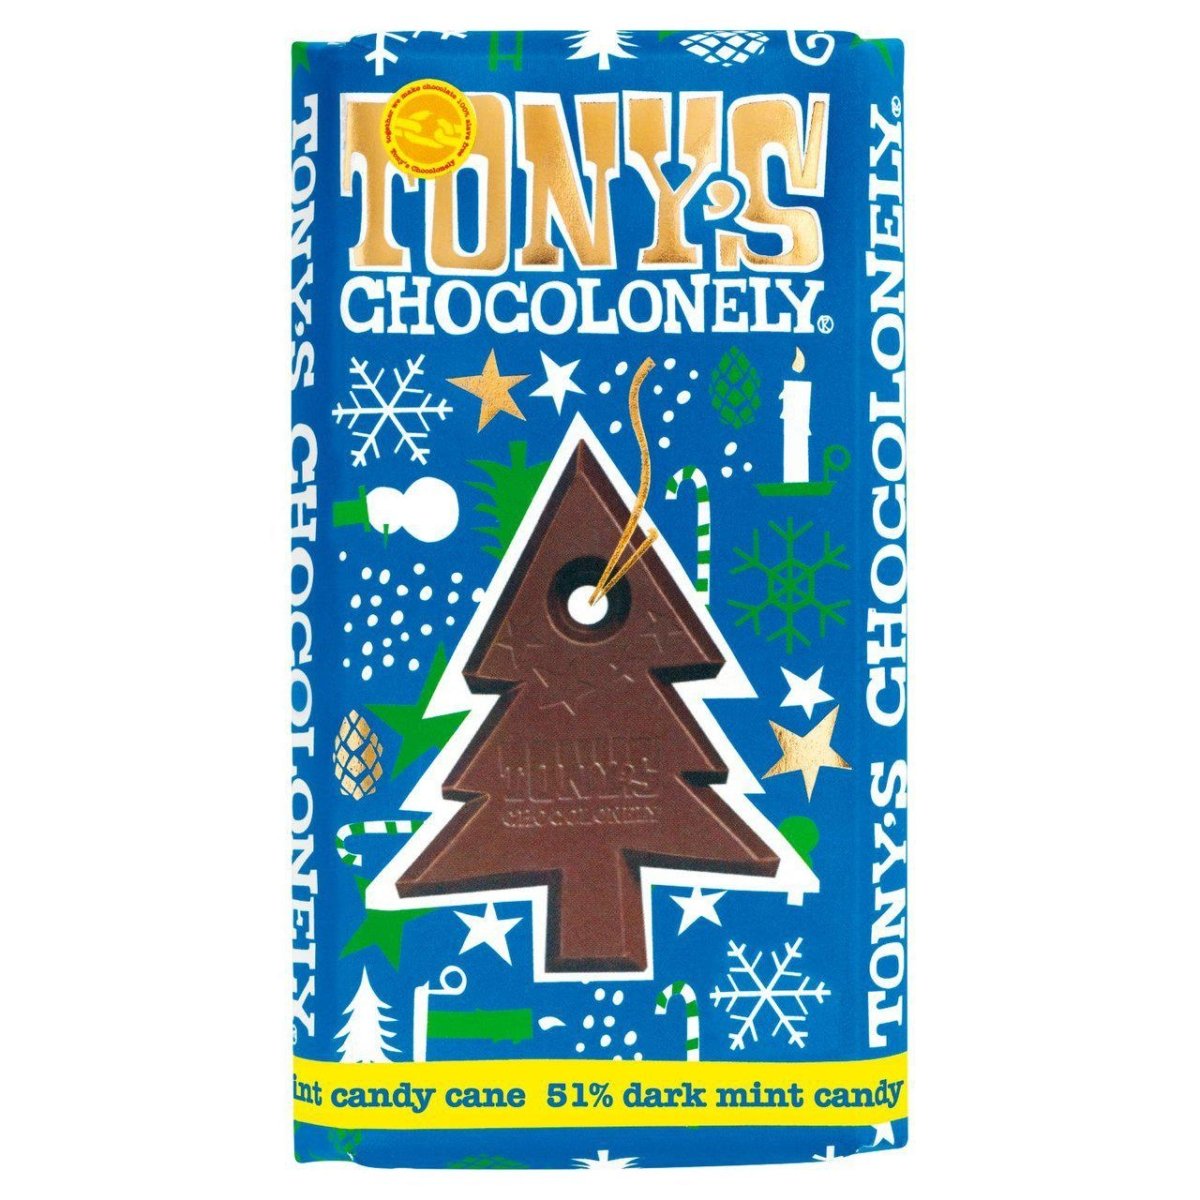 Tony's Chocolonely Dark Chocolate & Mint Candy Cane Bar 180g - Candy Mail UK